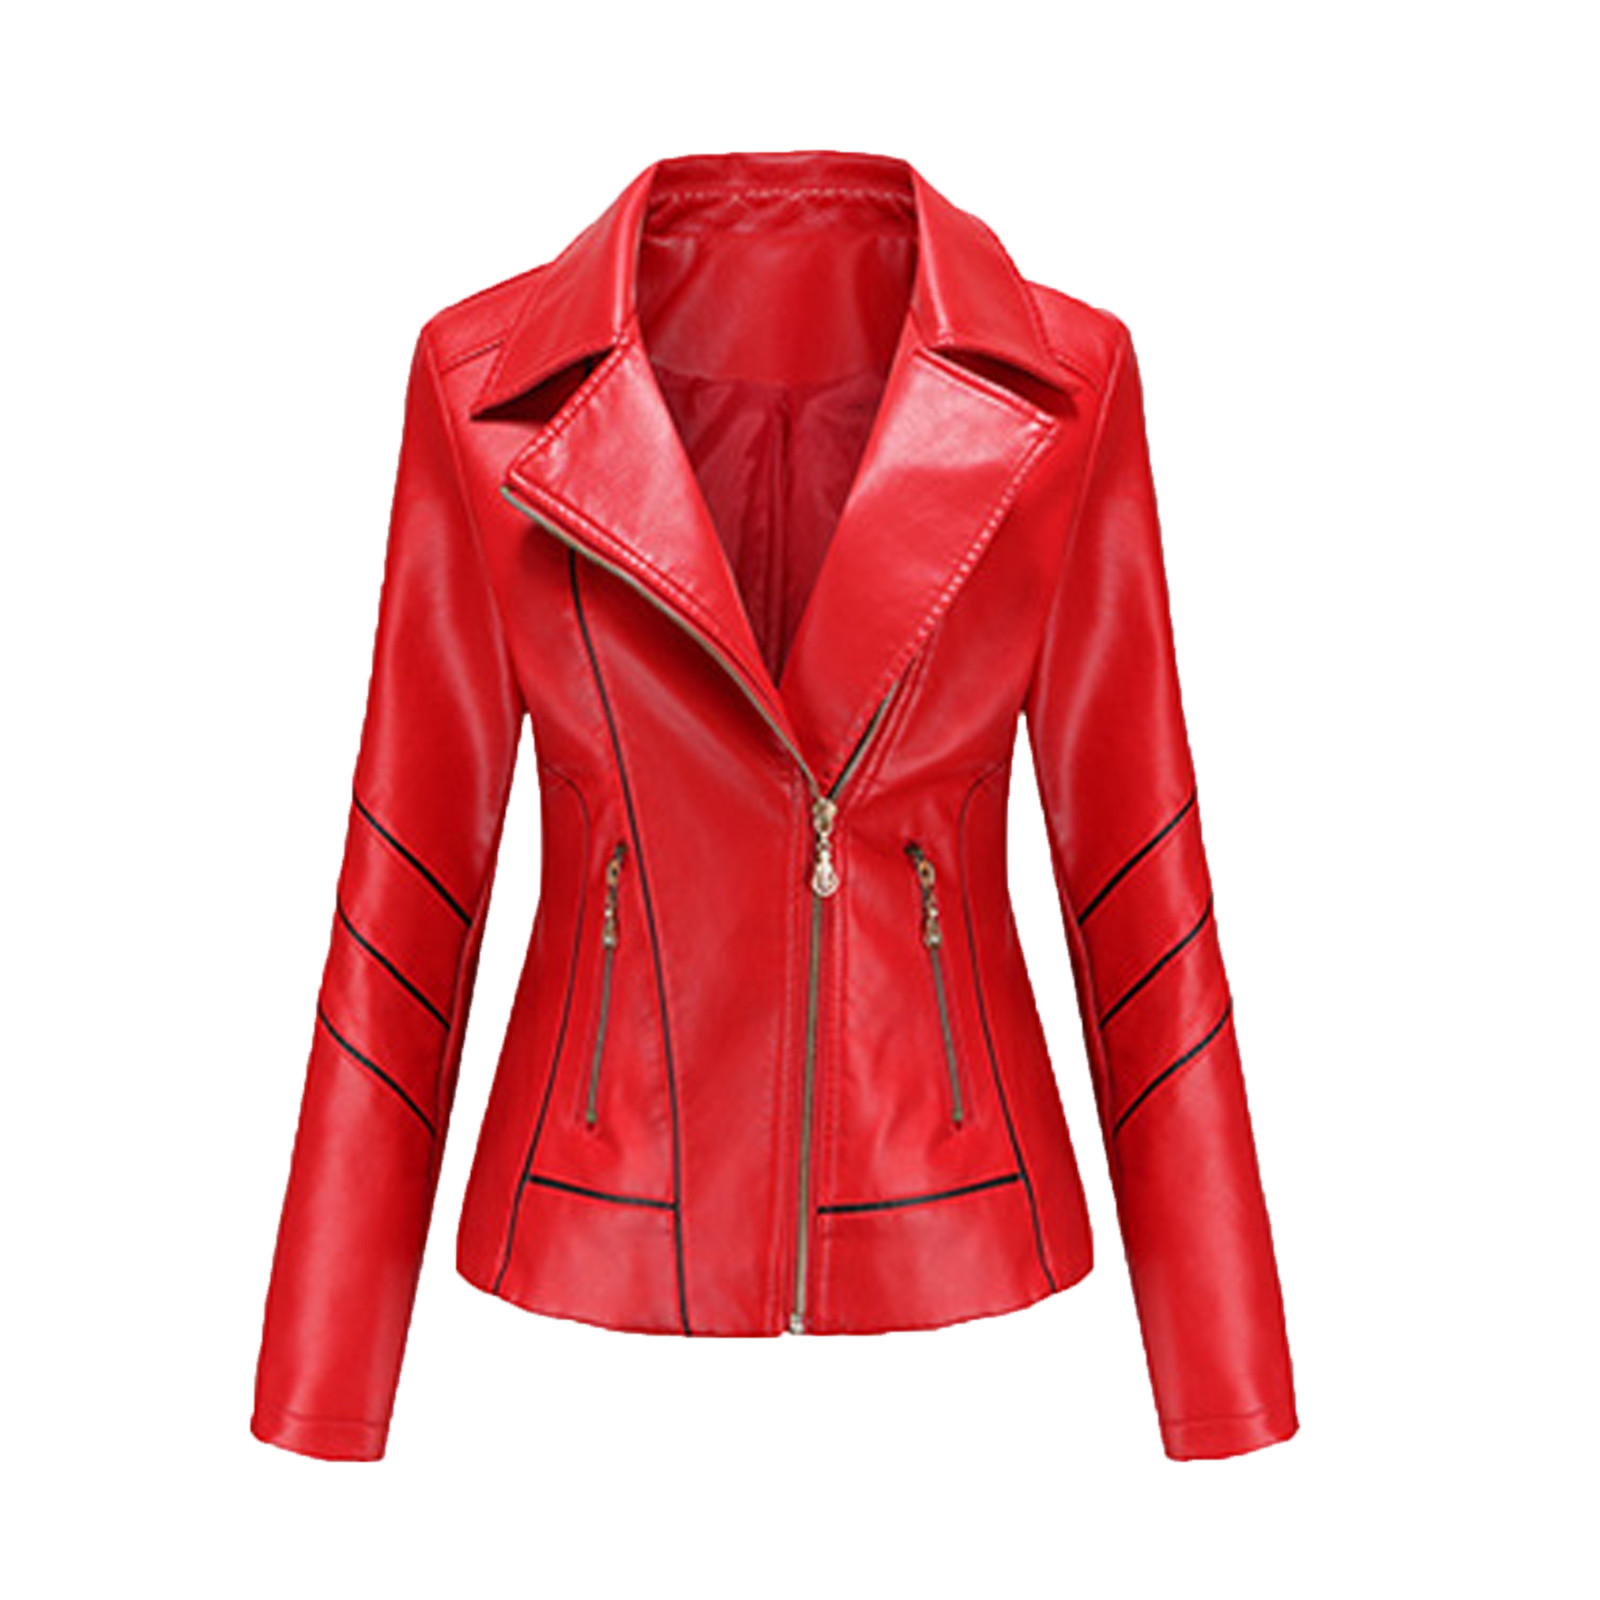 Juebong Womens Lapel Leather Jacket Coat Warm Moto Biker Jacket Outwear Slim Leather Solid Stand Collar Zip Motorcycle Suit Coat Jacket with Pockets, Red, XL - image 1 of 6